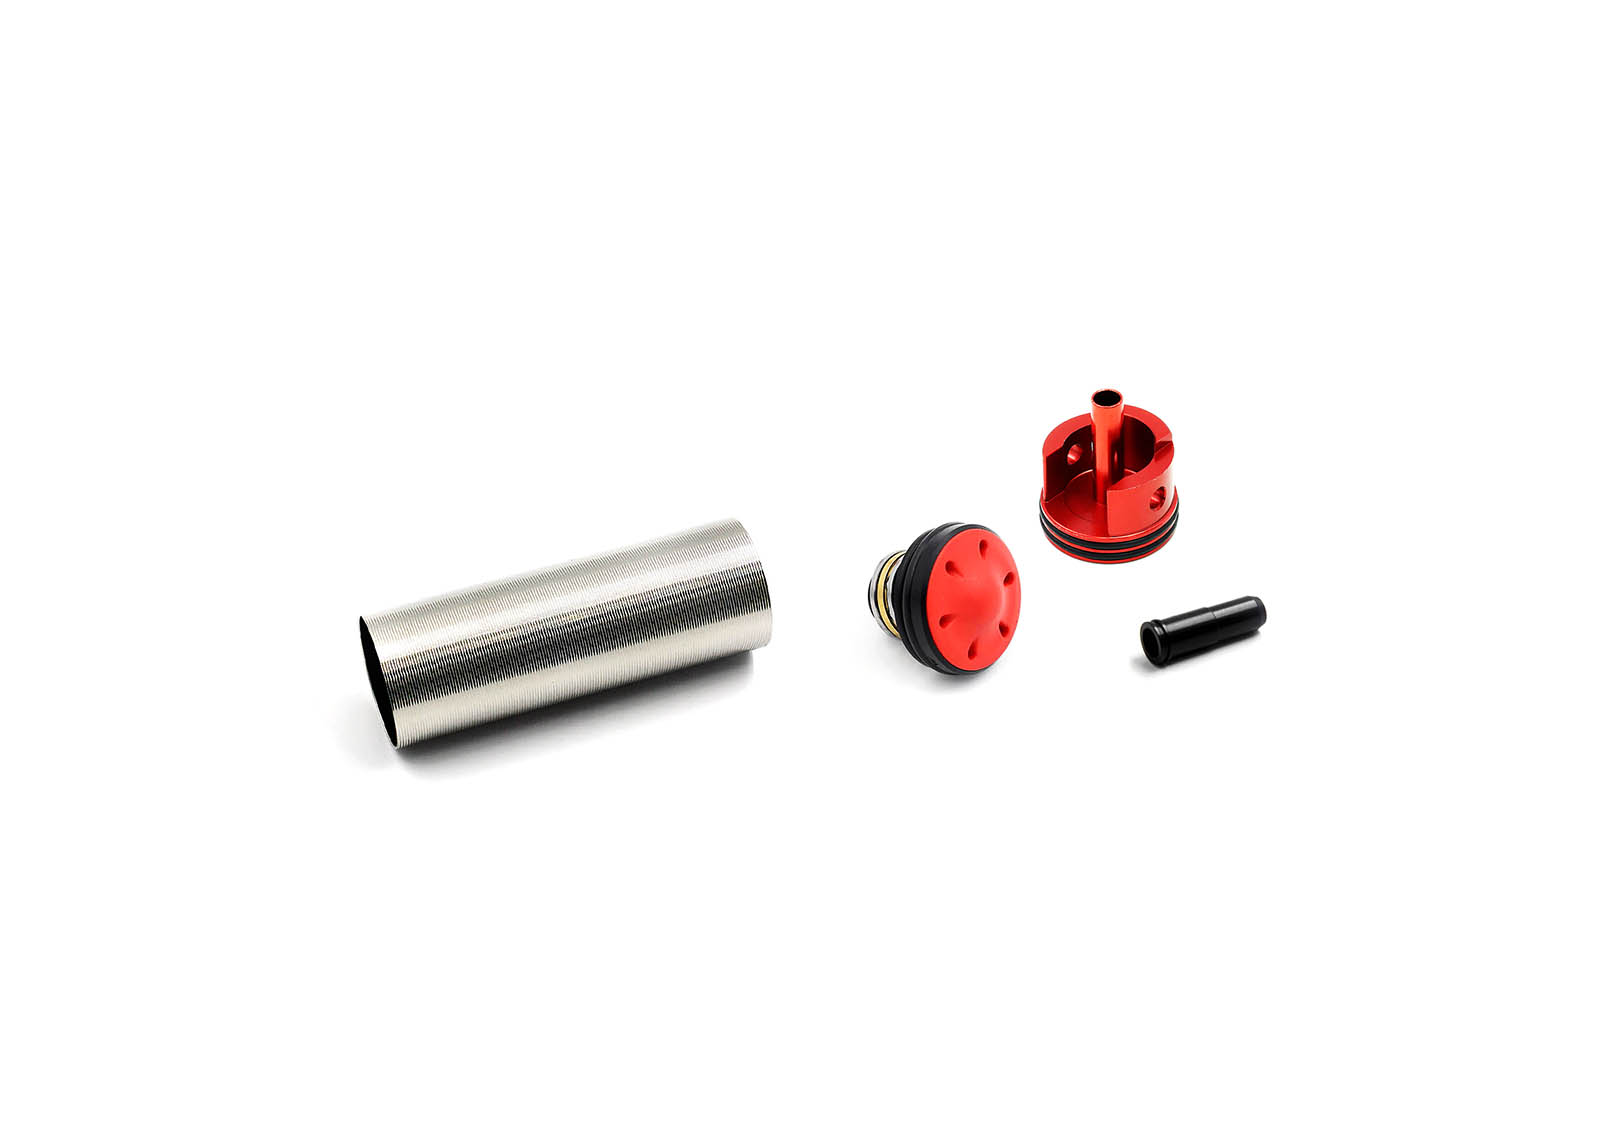 Bore-Up Cylinder Set for AUG - Modify AEG Airsoft parts